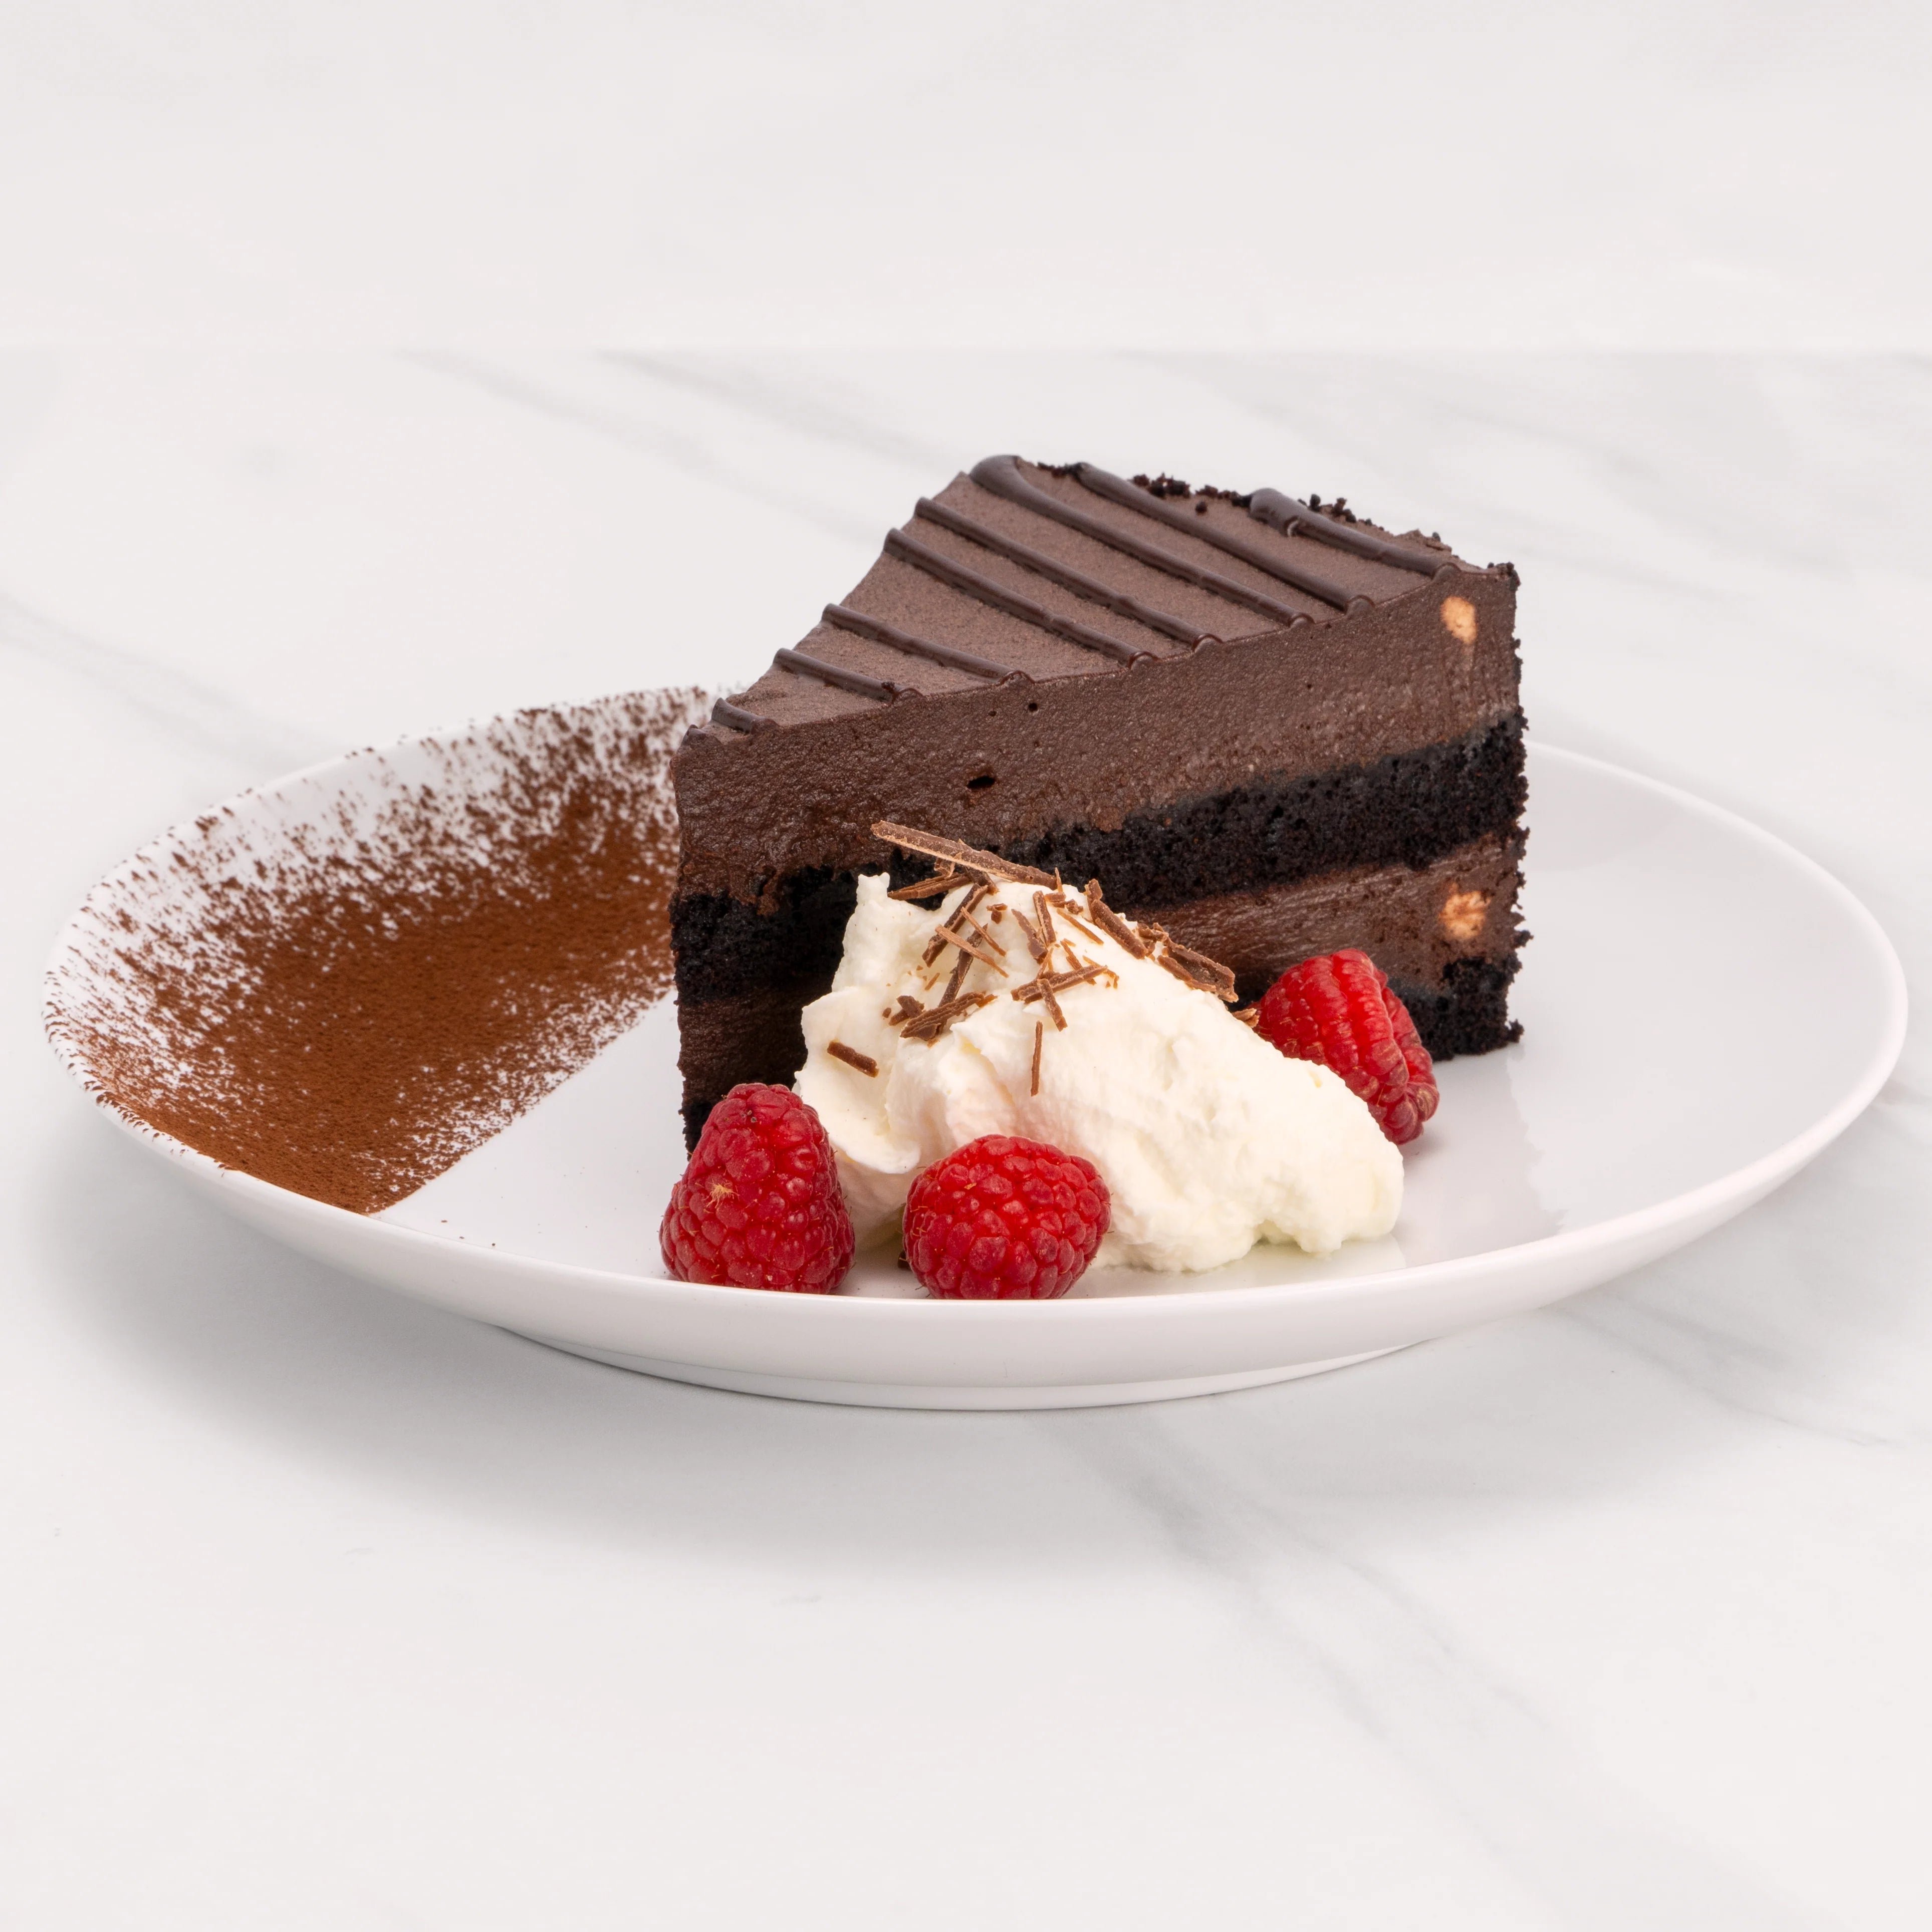 Slice of Gluten Free Chocolate Midnight Marquise Cake garnished with chocolate, raspberries, and a dollop of crème.